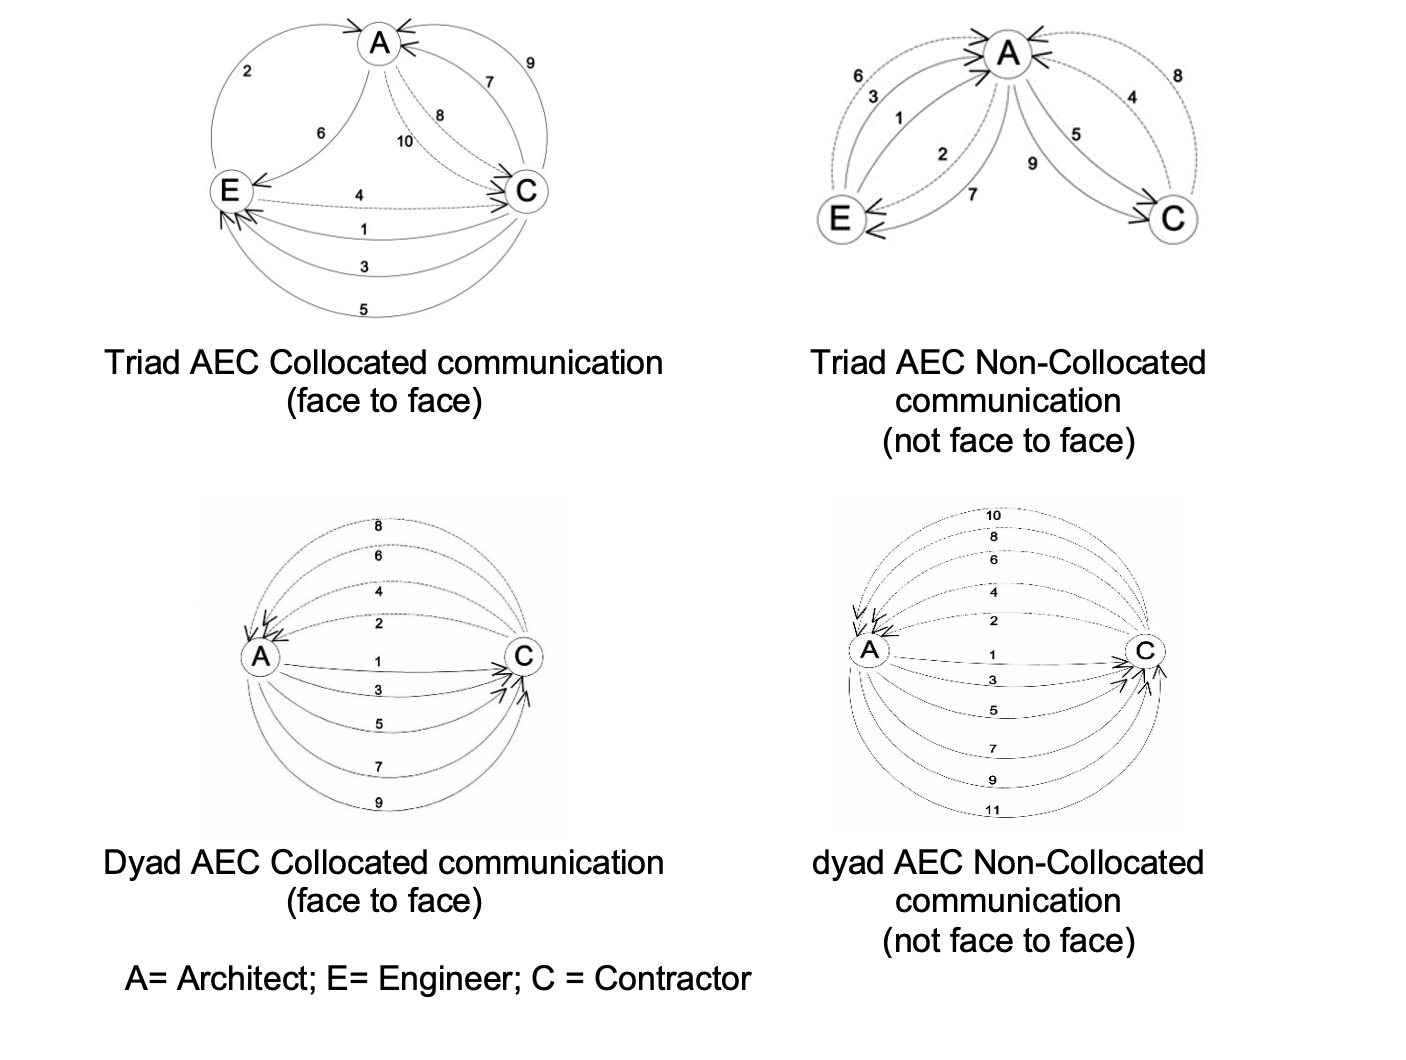 OPTIMIZING MALAYSIAN ARCHITECT, ENGINEER AND CONTRACTOR’S (AEC) TEAM PRODUCTIVITY USING MINIMAL COLLABORATIVE TECHNOLOGY 